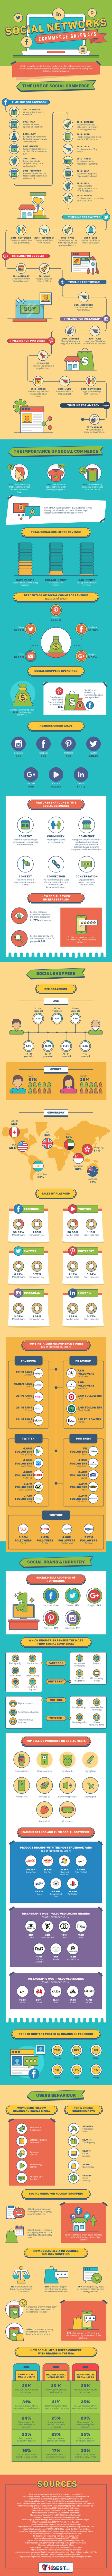 business-facebook-page-infographic-social-commerce